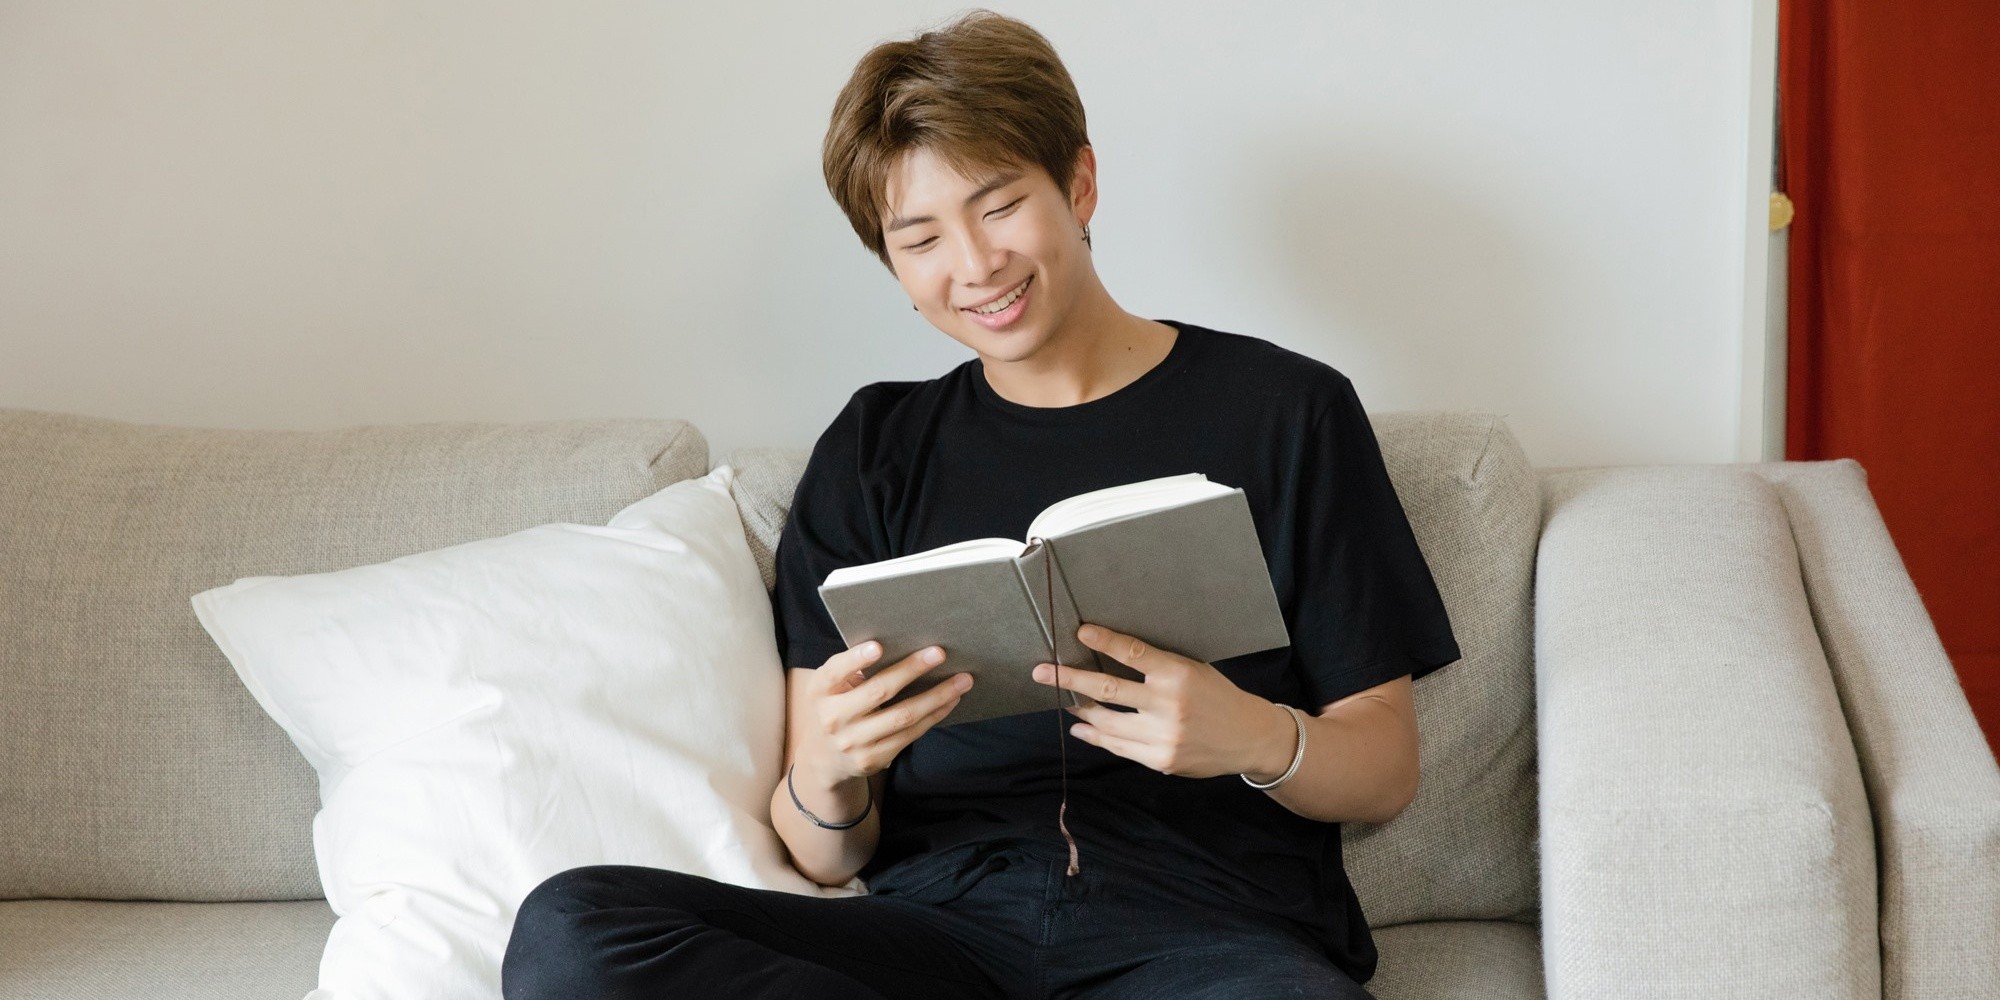 BTS leader RM a.k.a. Namjoon donates 100 million won to an art museum for his birthday 